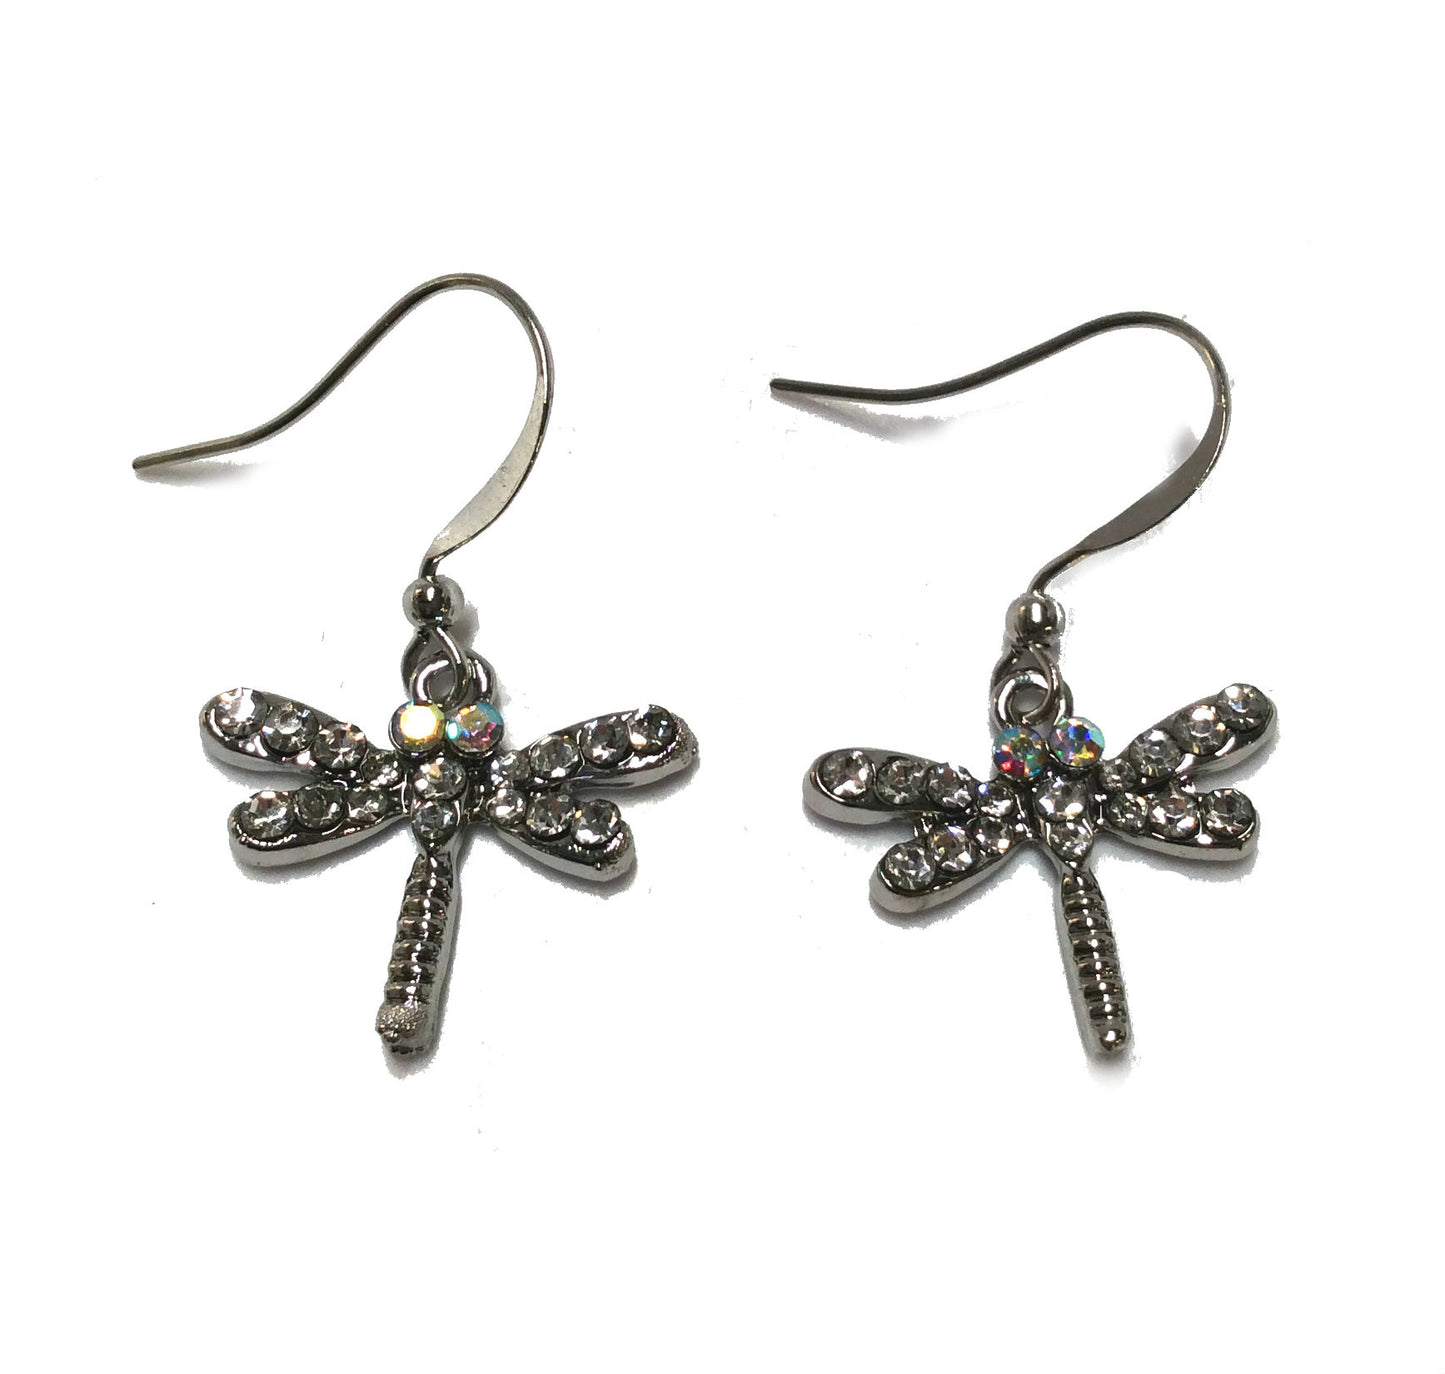 Tiny Dragonfly Dangling Earrings #28-11092AB